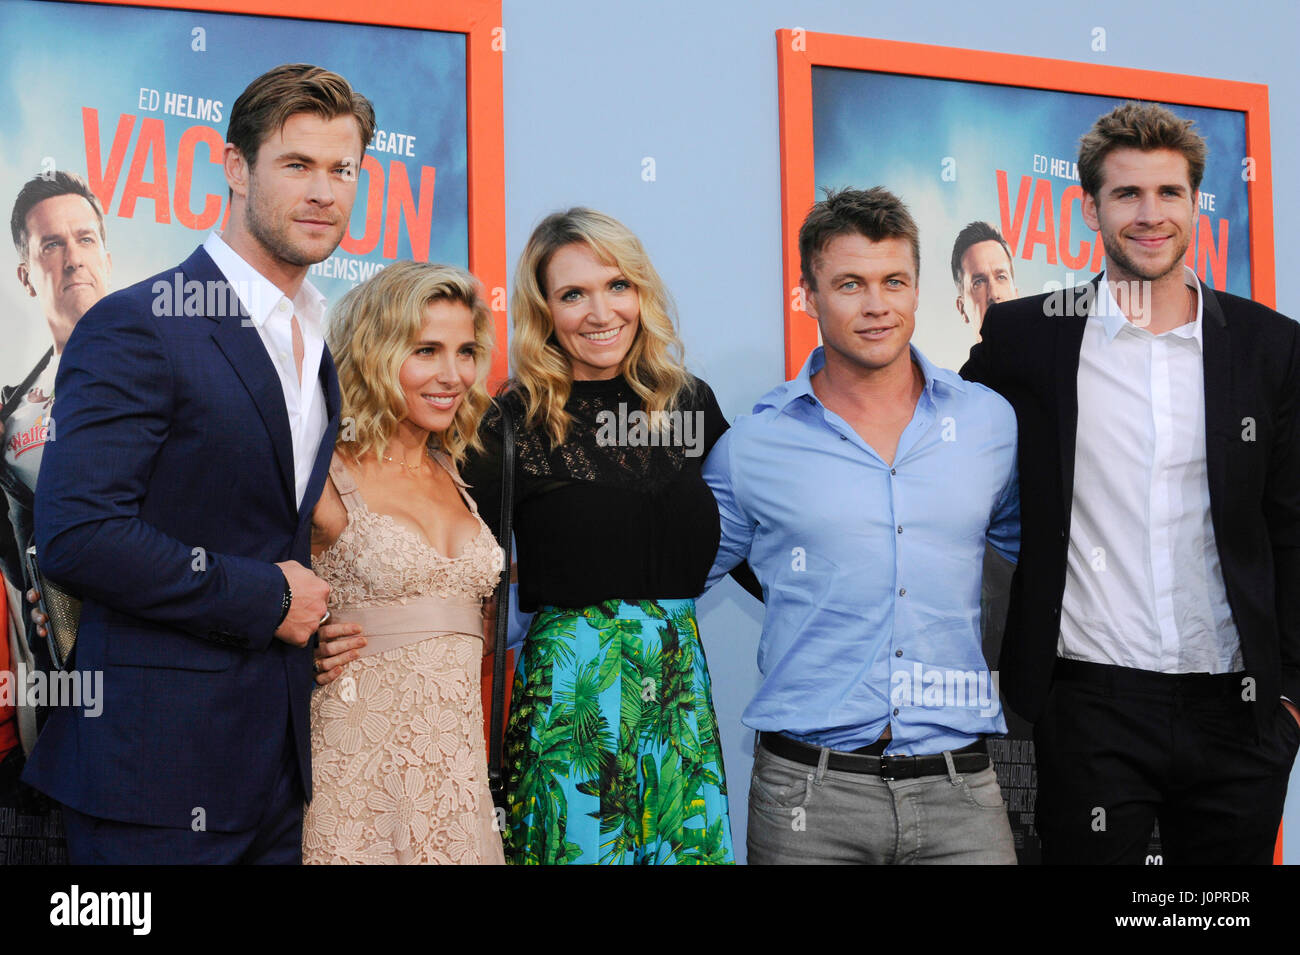 All About Chris and Liam Hemsworth's Parents, Craig and Leonie